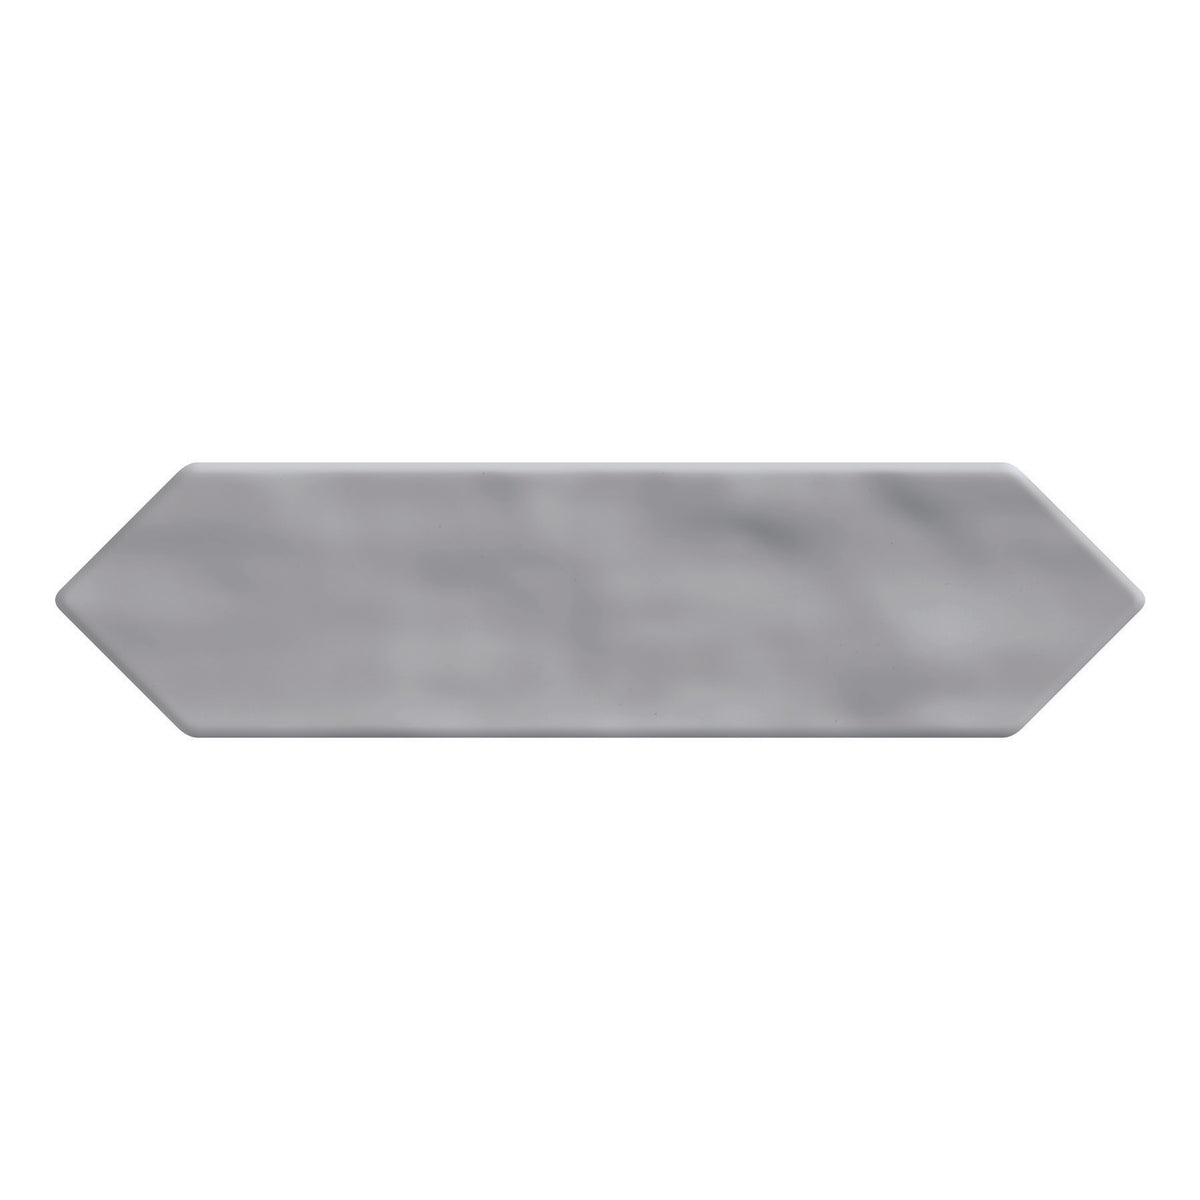 Daltile - Stagecraft - 3 in. x 12 in. Picket Wall Tile - Matte Desert Gray X714